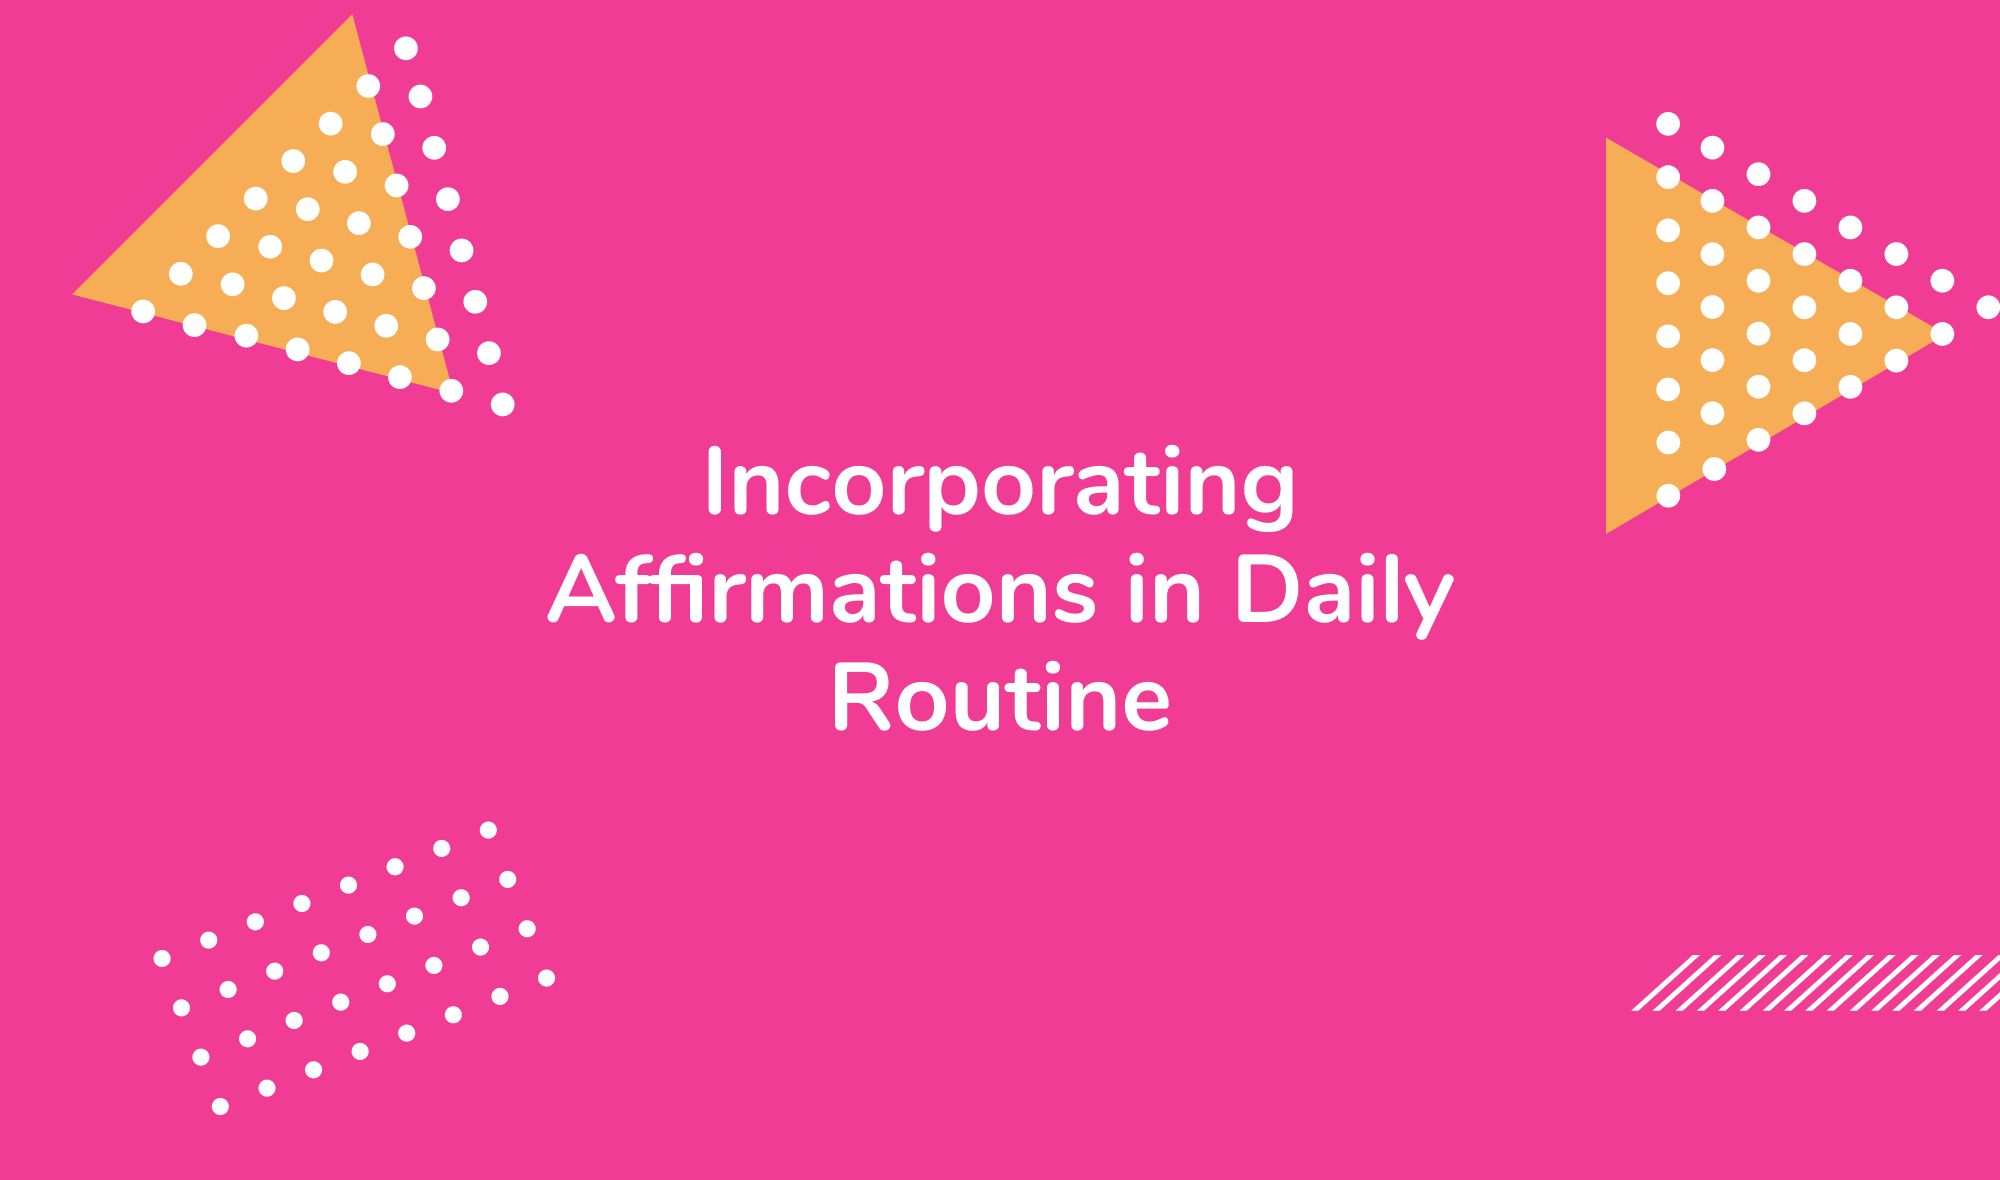 Incorporating Affirmations in Daily Routine